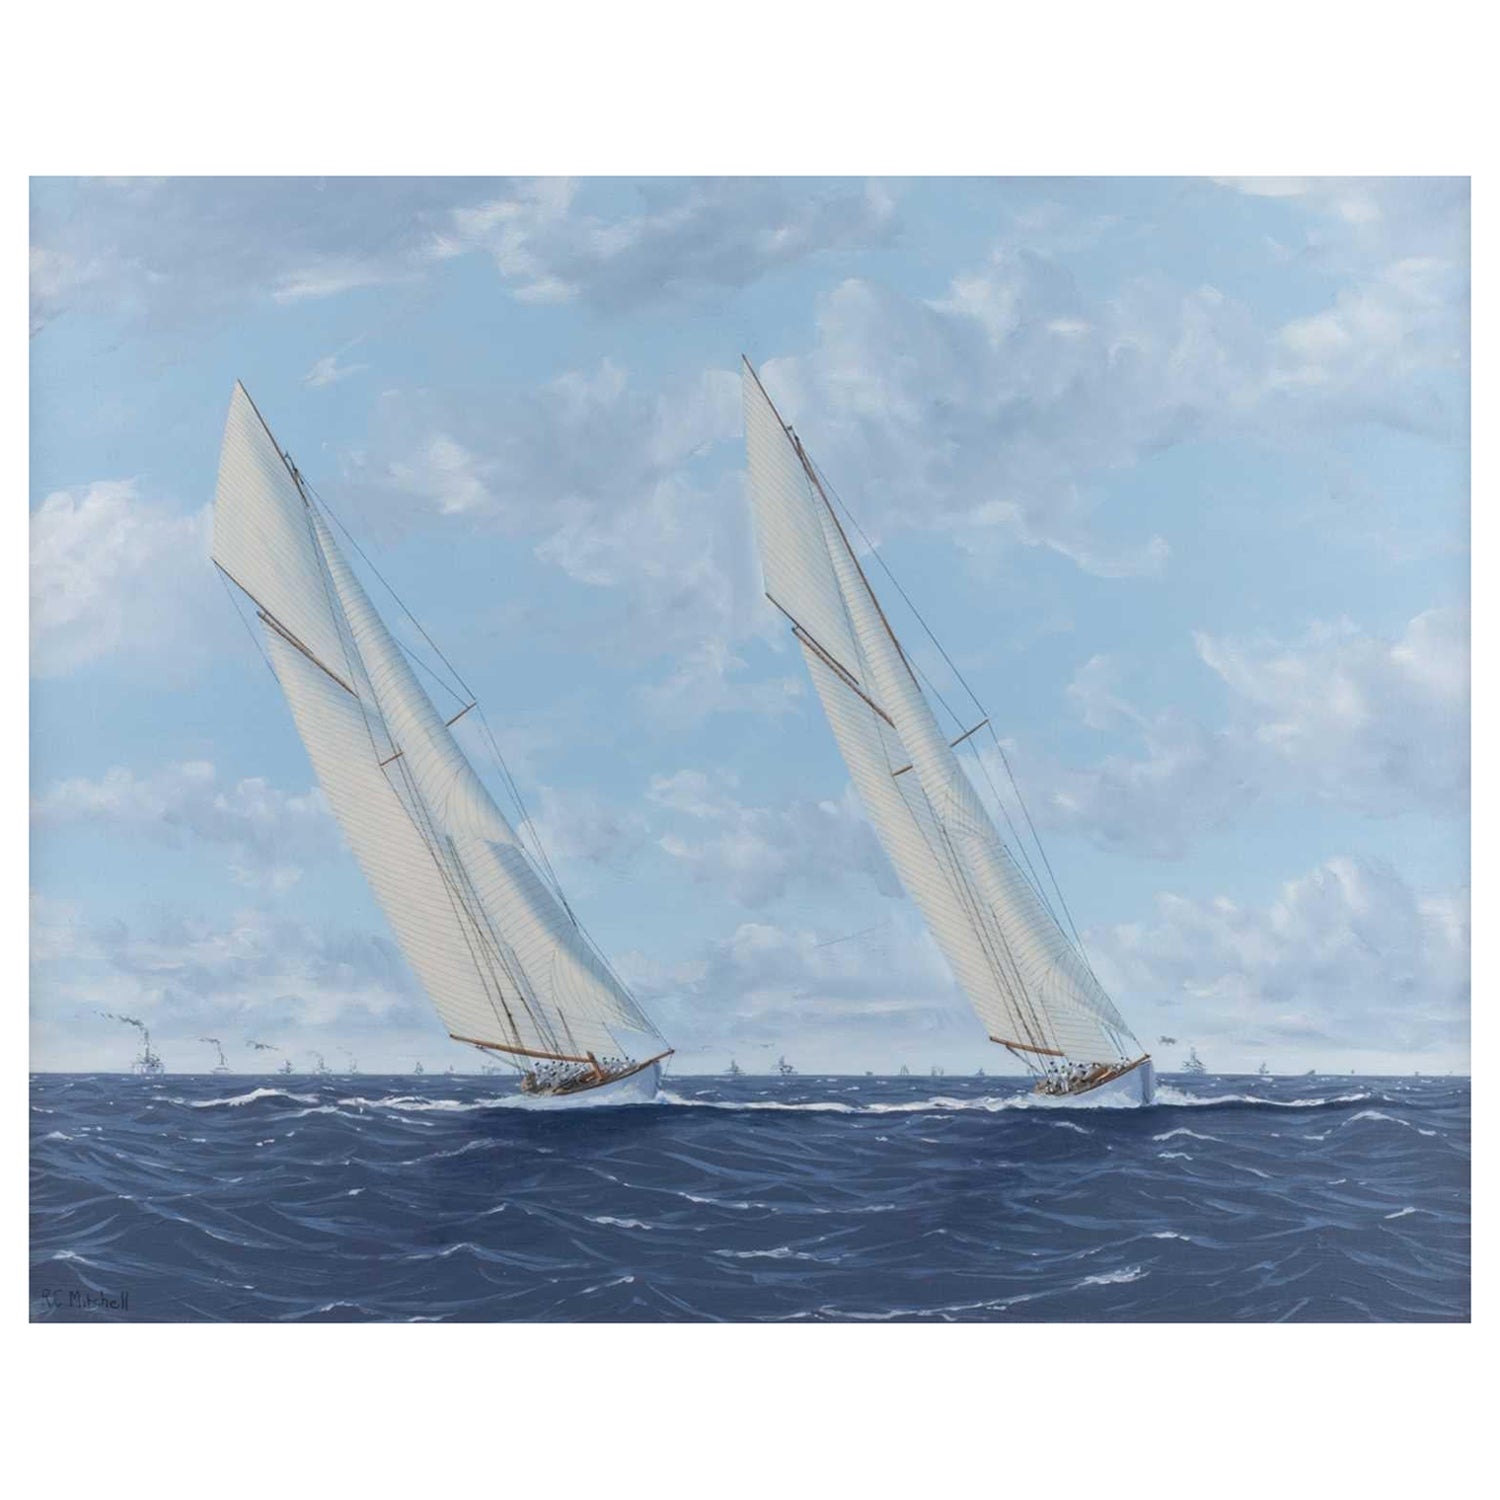 Ron Charles Mitchell of London (b.1960) Americas Cup 1893 Yacht Racing 